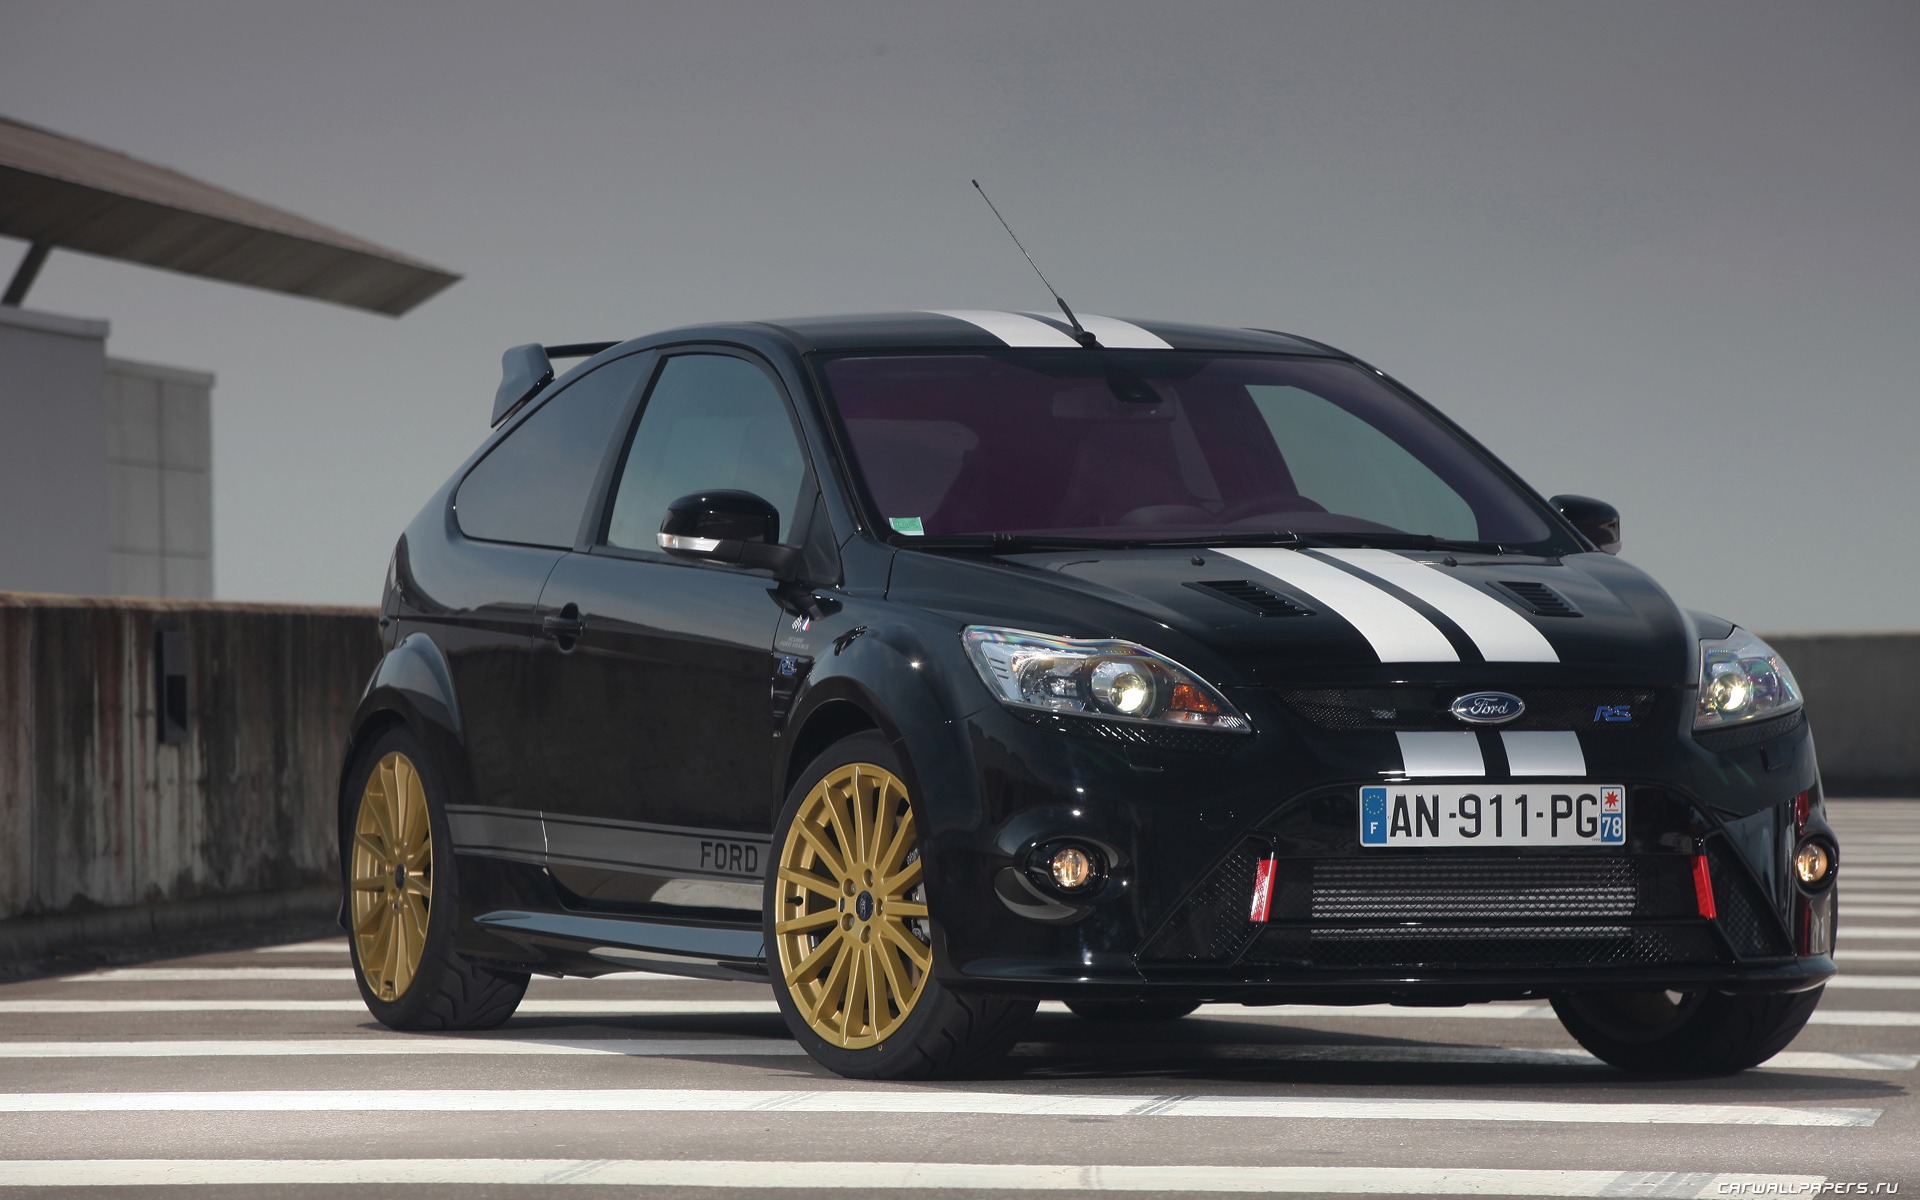 Ford Focus RS Le Mans Classic - 2010 福特2 - 1920x1200